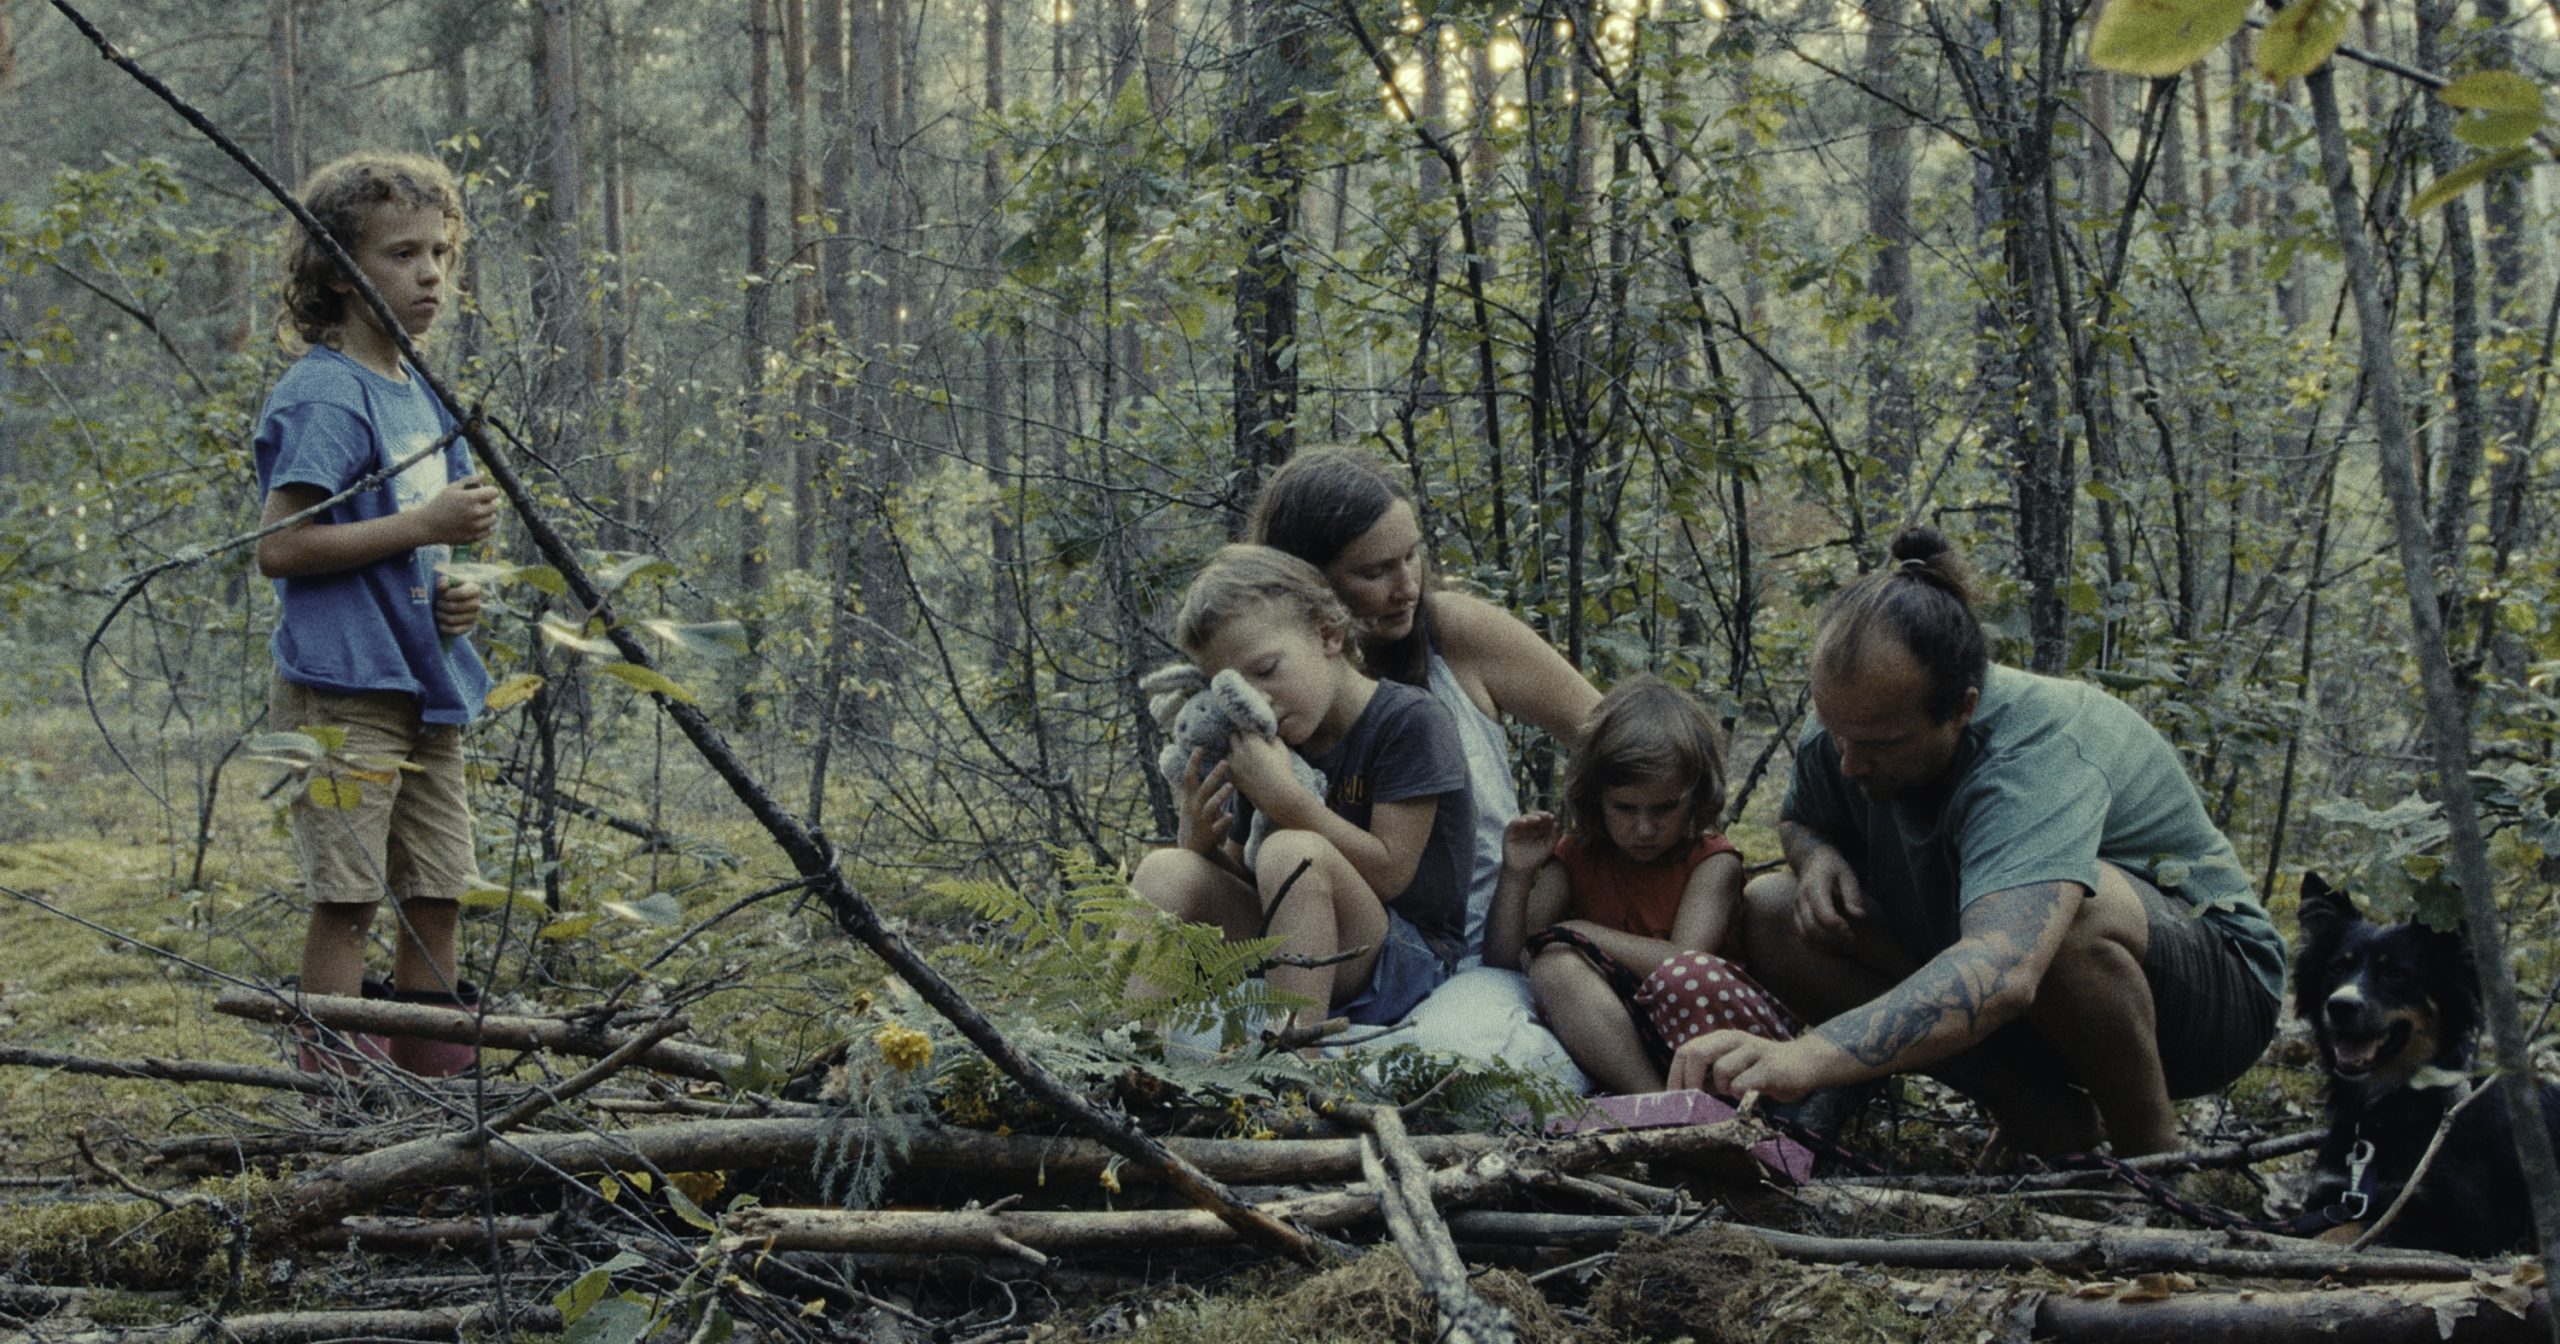 A family with father, mother and three children are sitting in a dense forest.